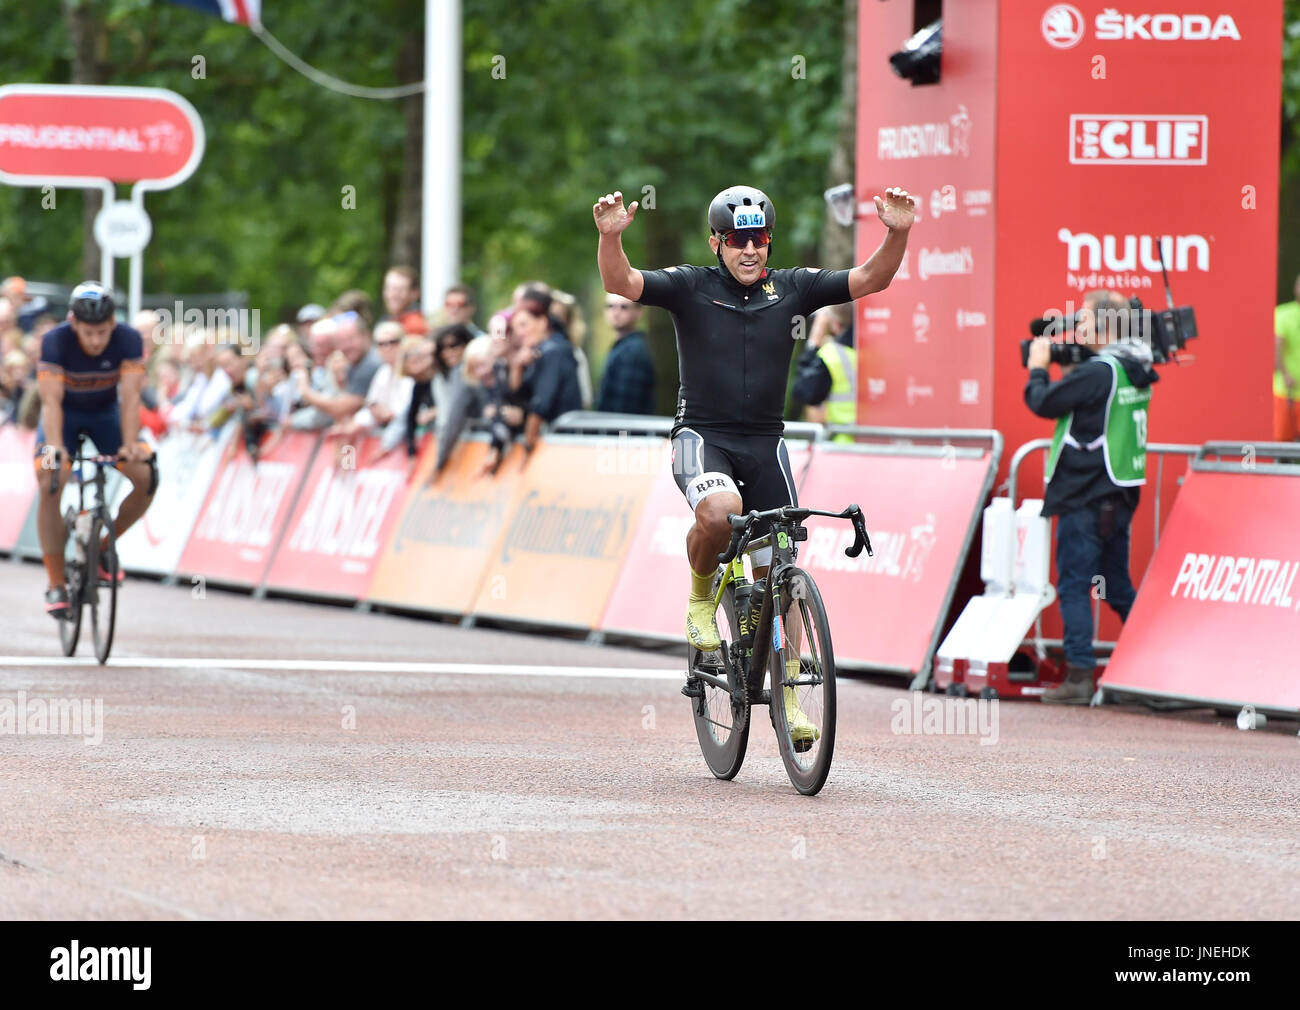 London, UK. 30th July, 2017. The first one finished just under 4 hours (the official result be updated soon at Prudential RideLondon-Surrey 100 on Sunday, July 30, 2017, LONDON ENGLAND: Photo : Taka G Wu Credit: Taka Wu/Alamy Live News Stock Photo